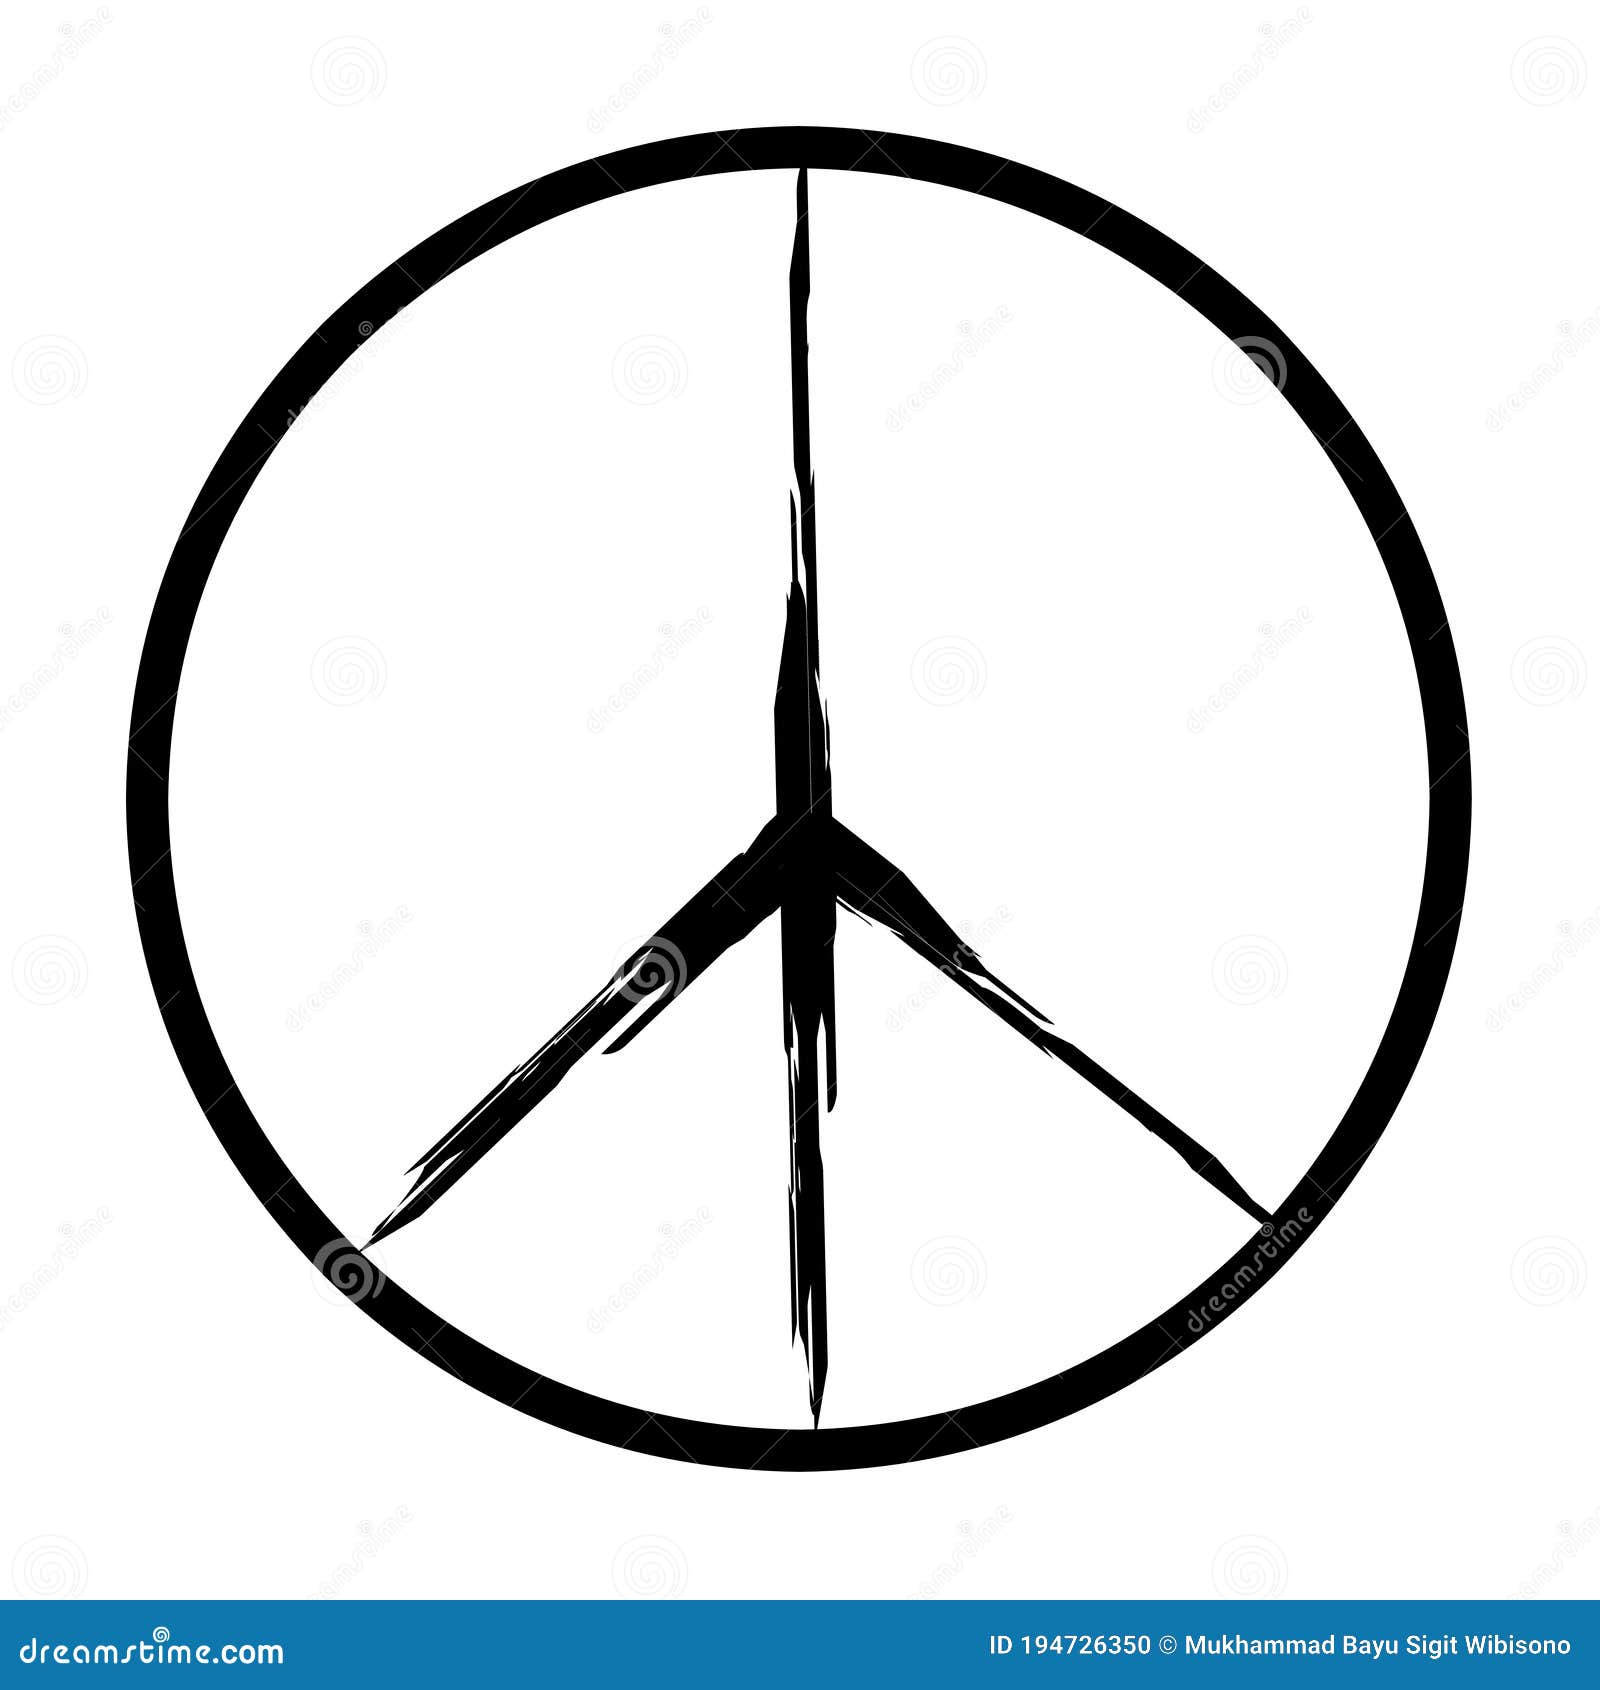 Illustration Vector Graphic of Simple Black Peace Symbol on White Background  Stock Vector - Illustration of graphic, pictogram: 194726350